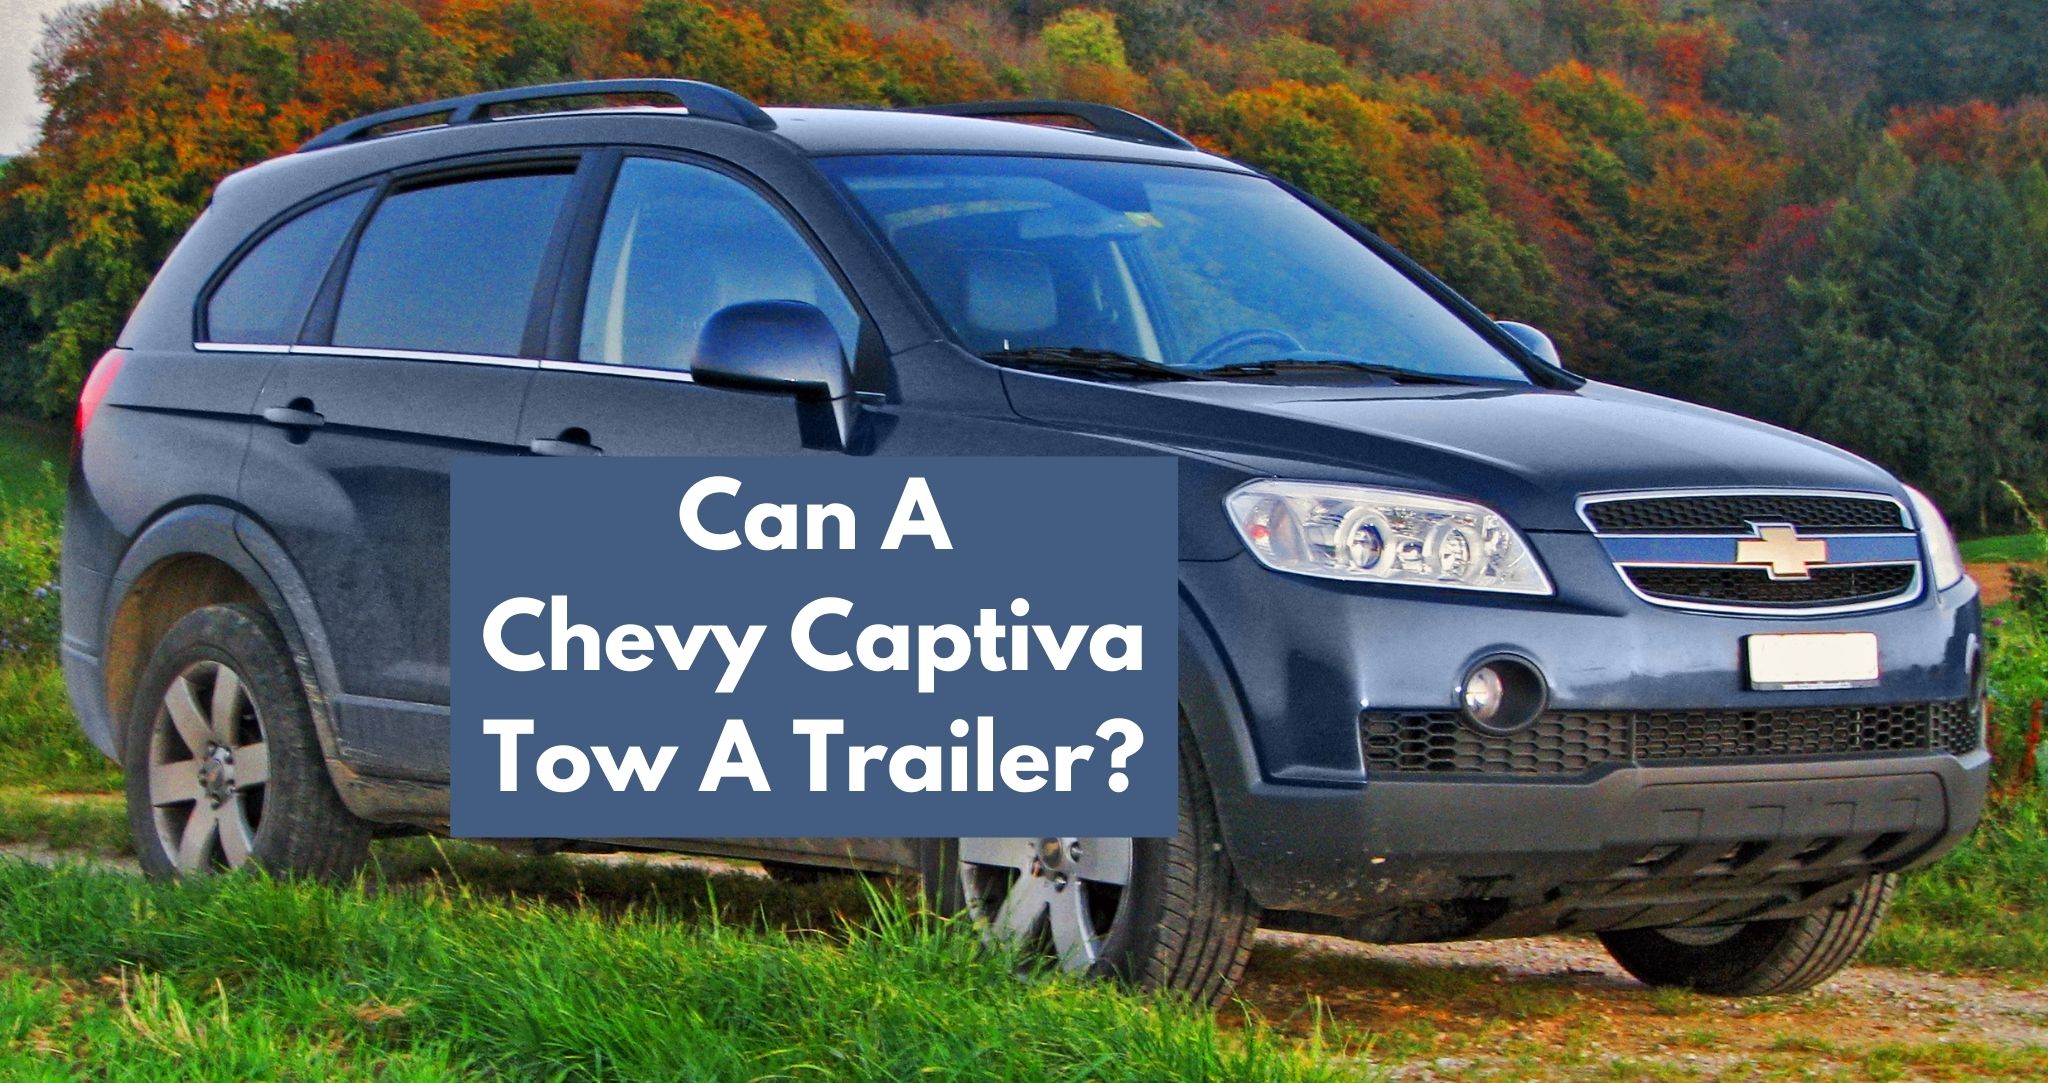 Can A Chevy Captiva Tow A Trailer